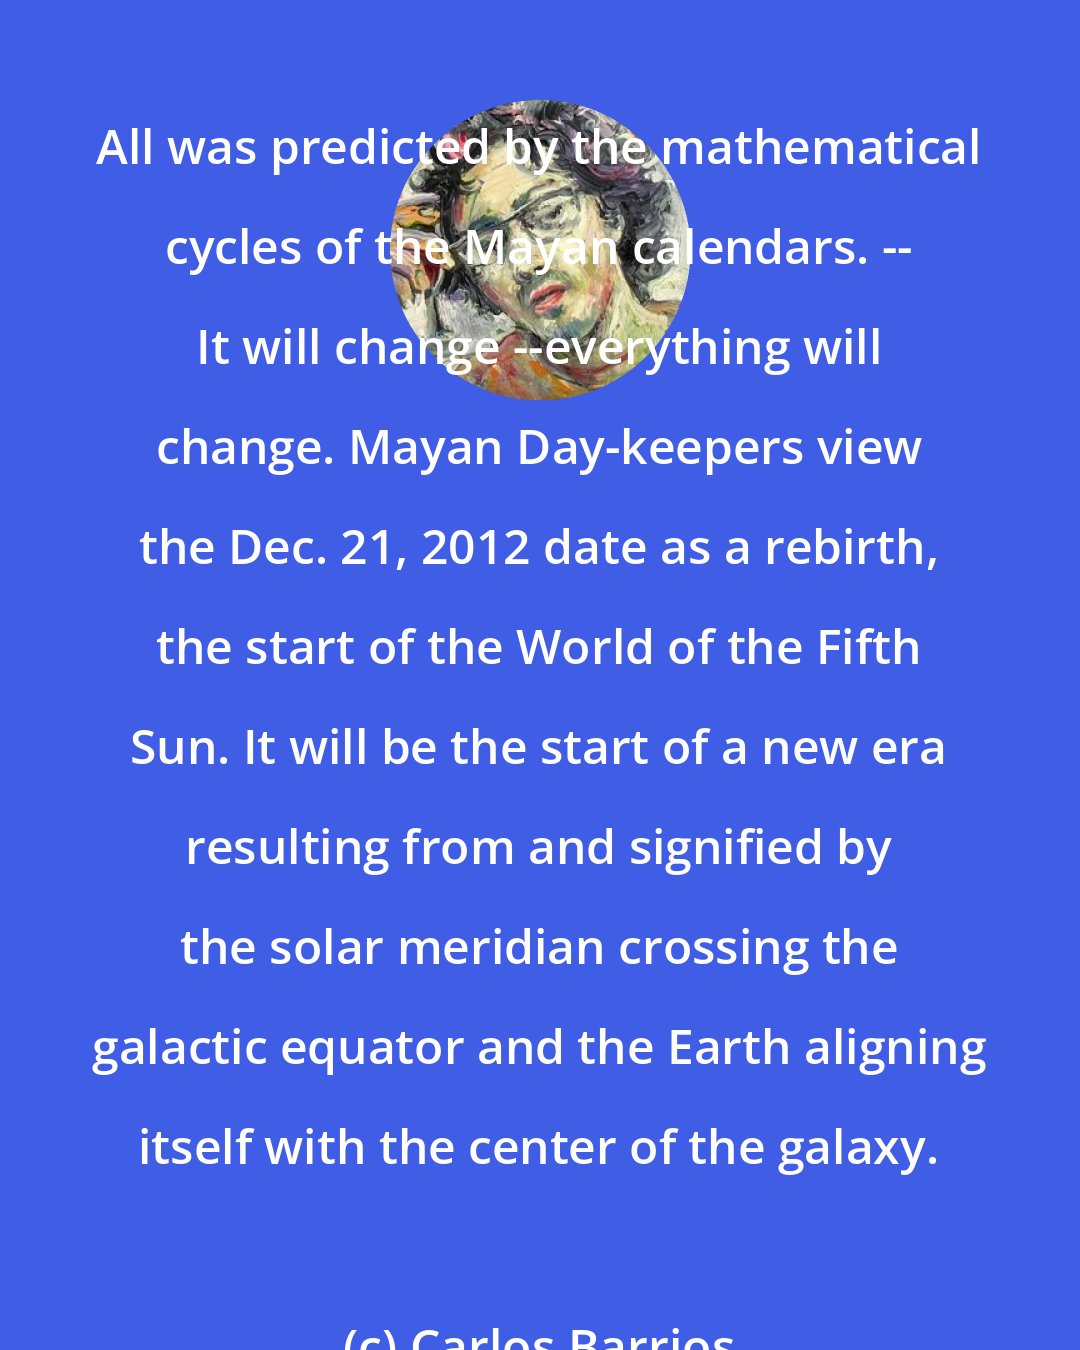 Carlos Barrios: All was predicted by the mathematical cycles of the Mayan calendars. -- It will change --everything will change. Mayan Day-keepers view the Dec. 21, 2012 date as a rebirth, the start of the World of the Fifth Sun. It will be the start of a new era resulting from and signified by the solar meridian crossing the galactic equator and the Earth aligning itself with the center of the galaxy.